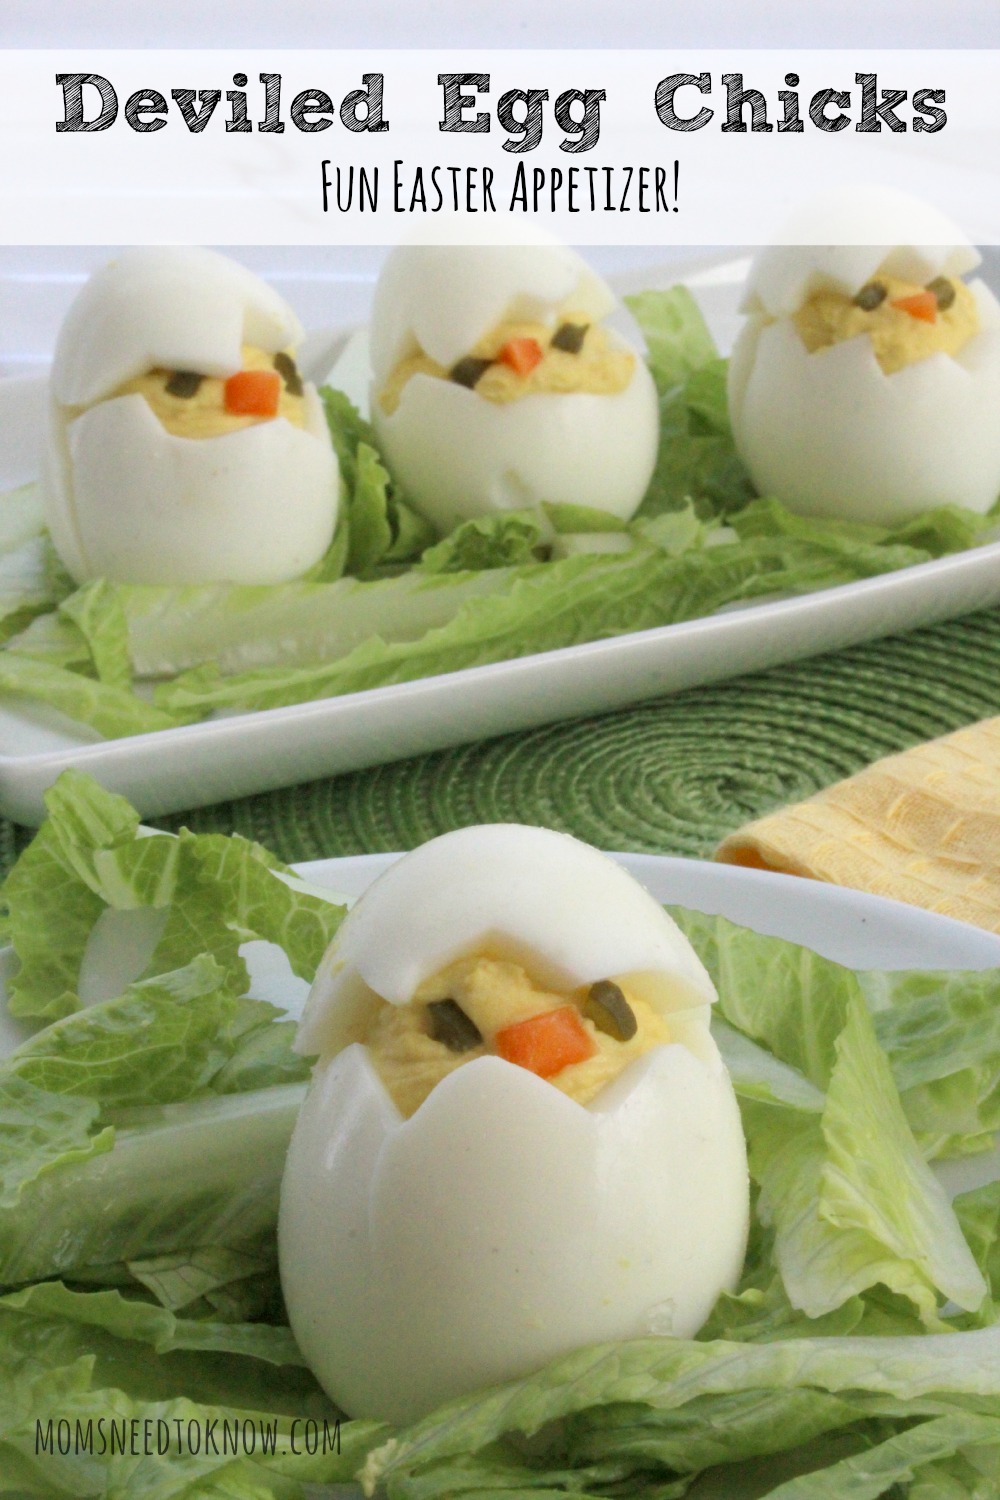 How to Make Deviled Egg Chicks | Moms Need To Know